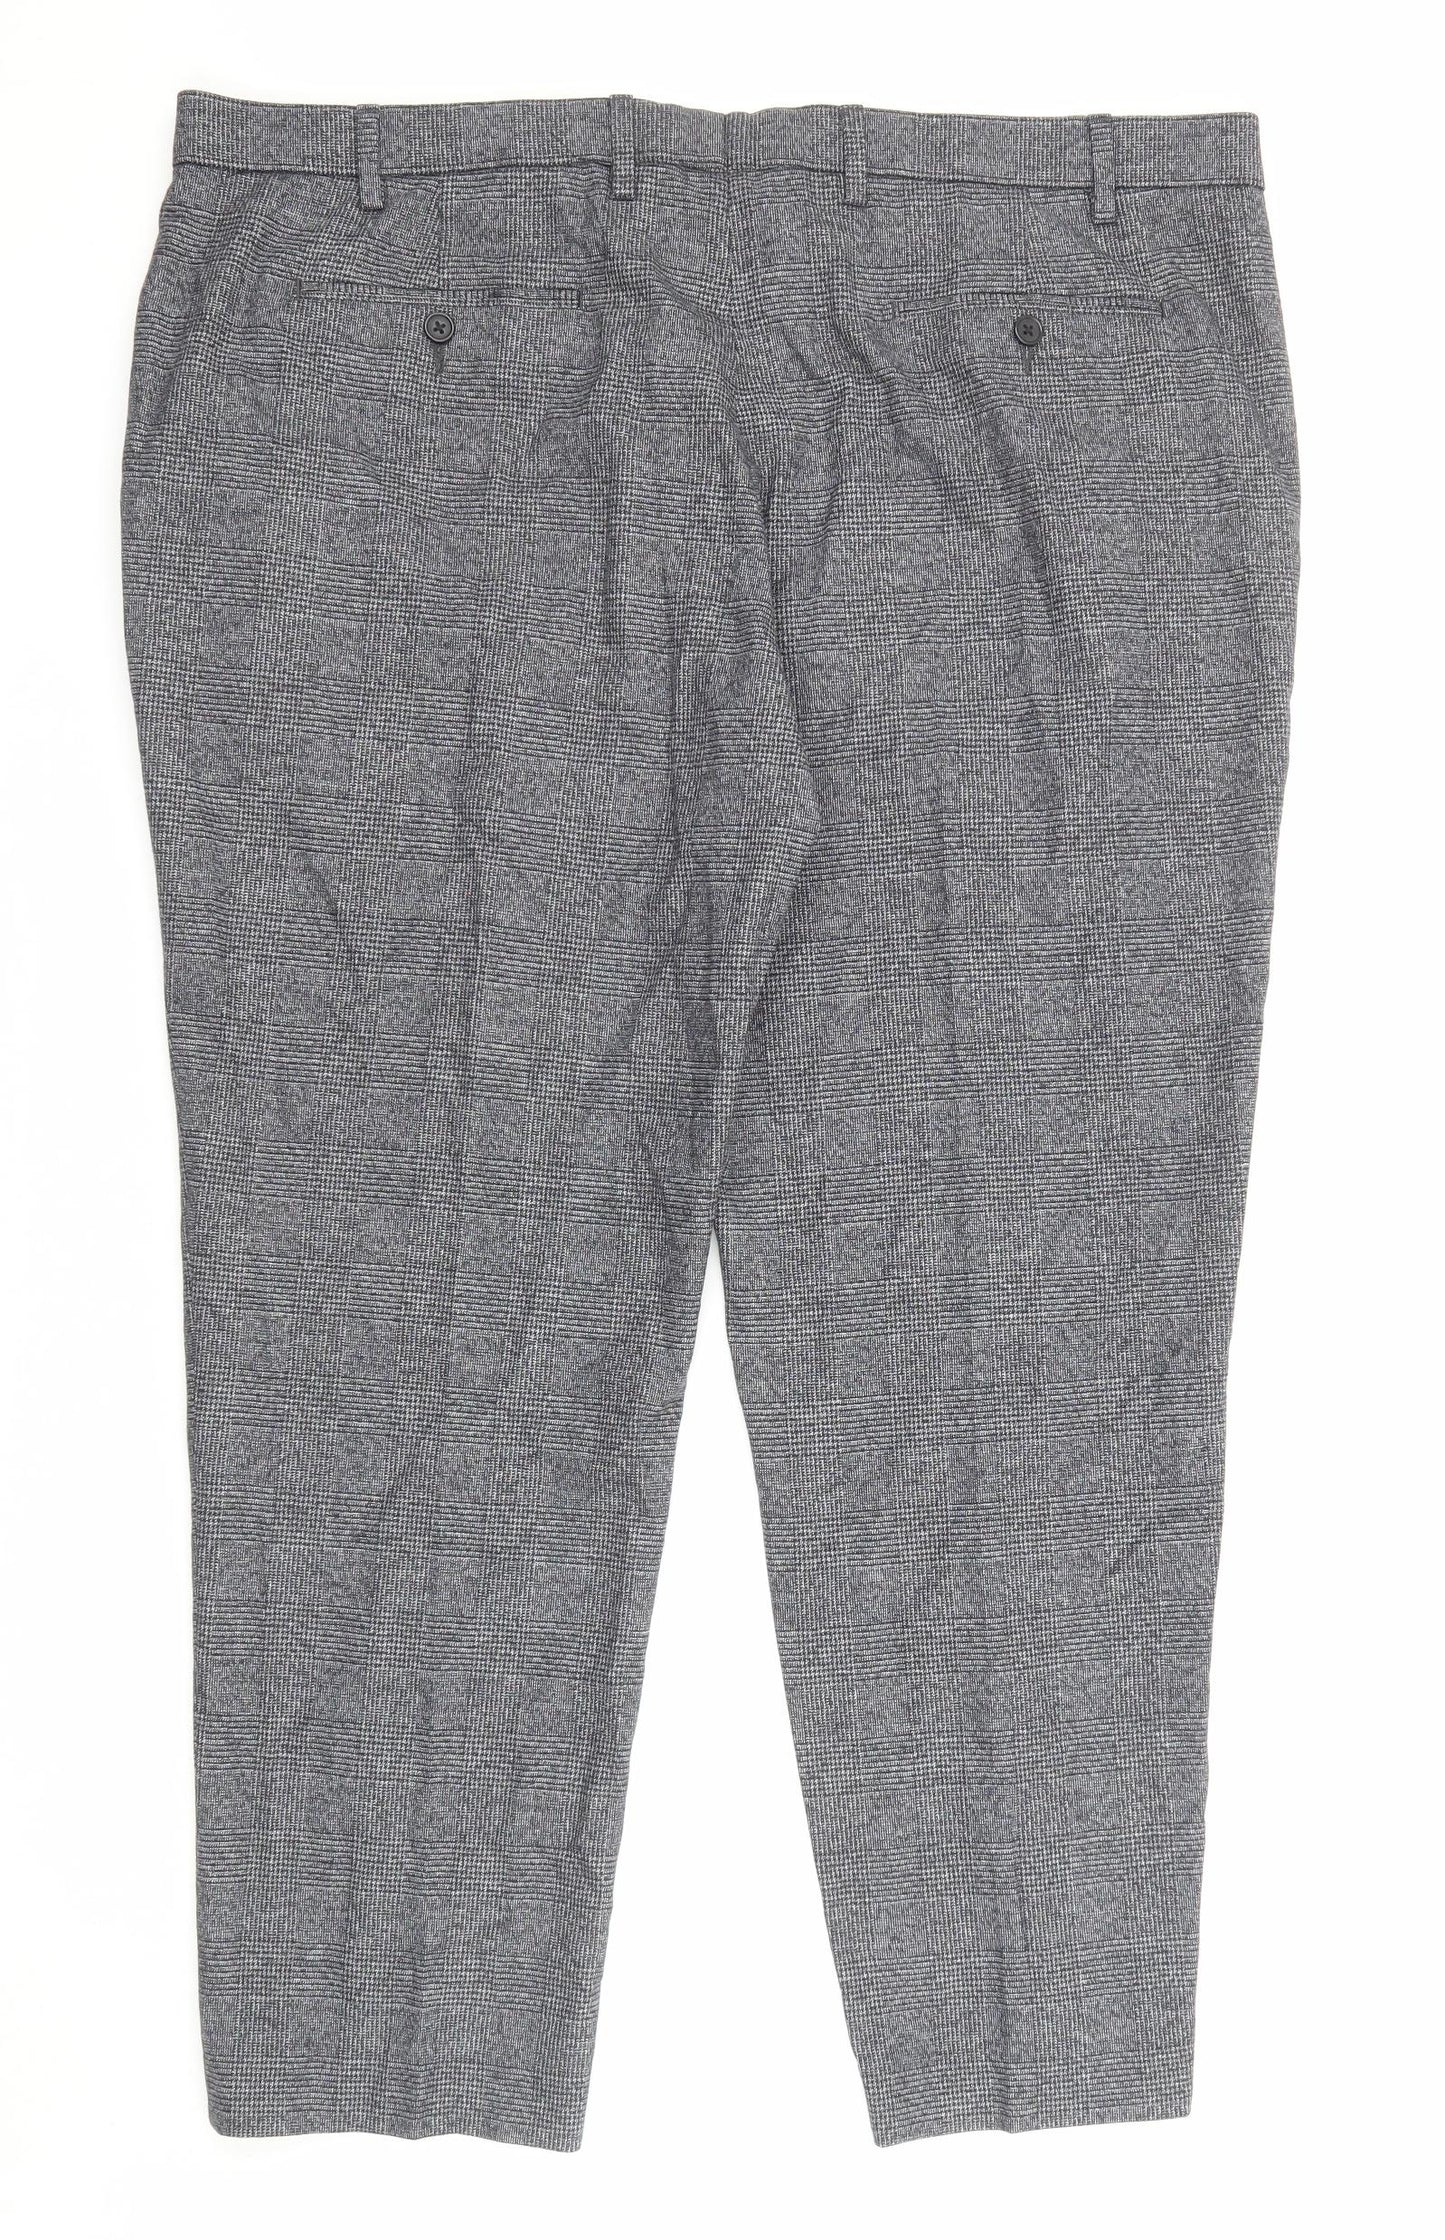 Marks and Spencer Mens Grey Polyester Dress Pants Trousers Size 44 in L28 in Regular Zip